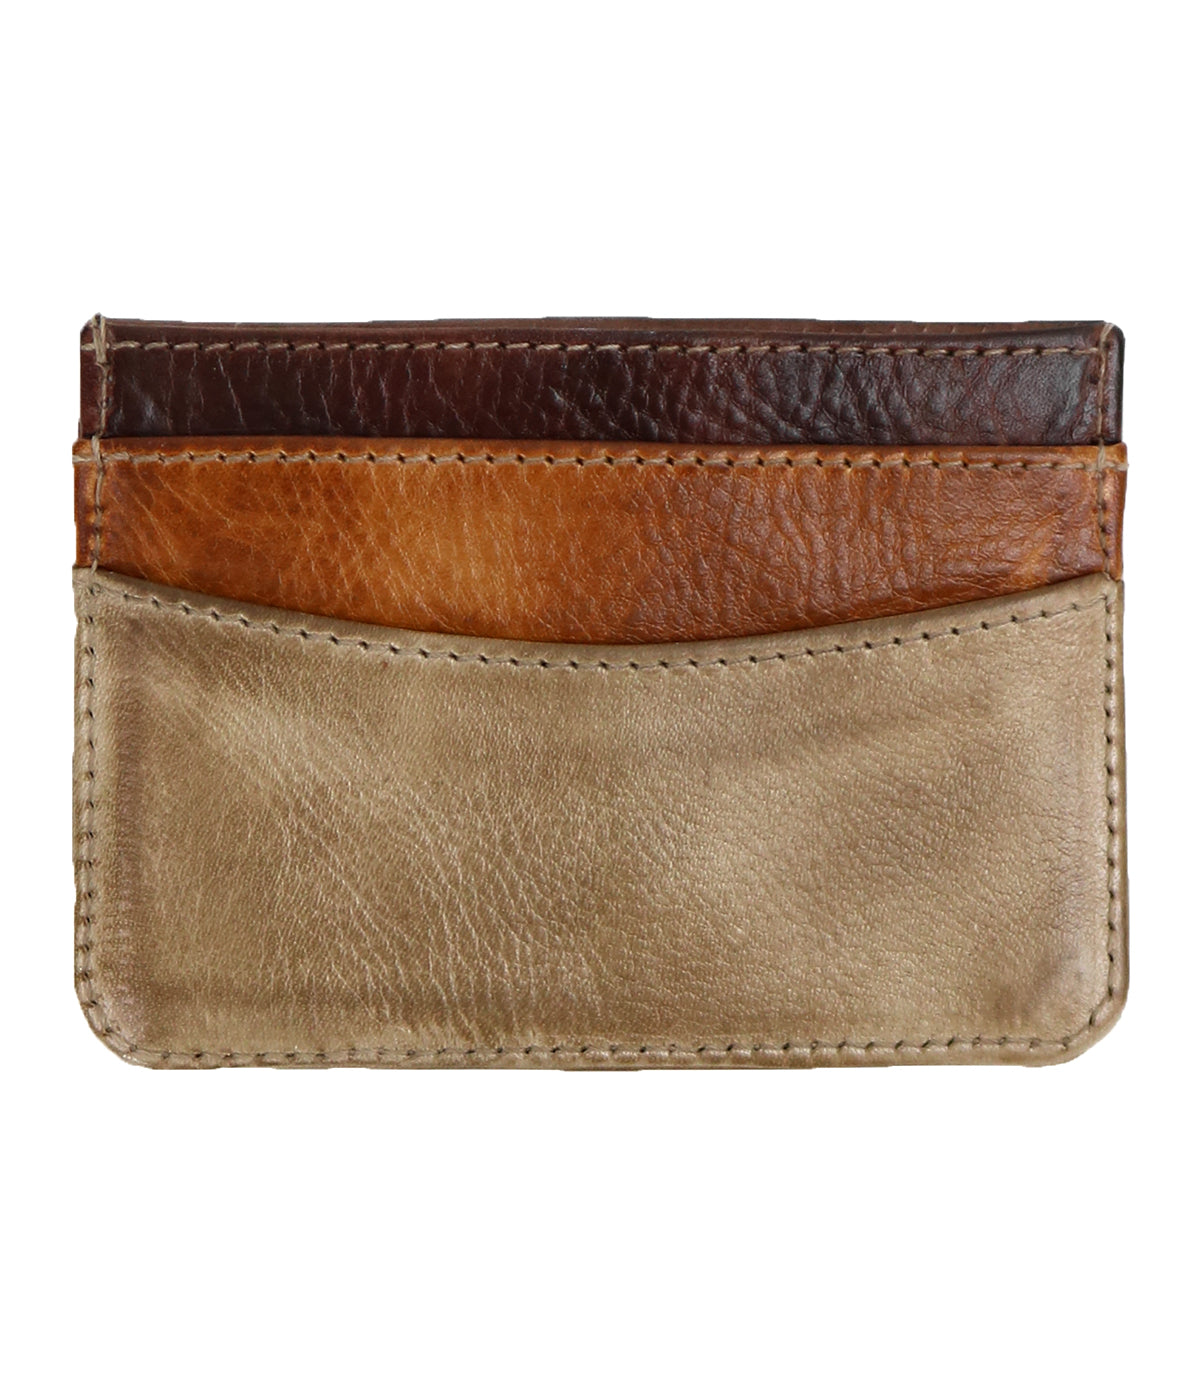 A convenient and compact close up of a Bed Stu Chuck card wallet.